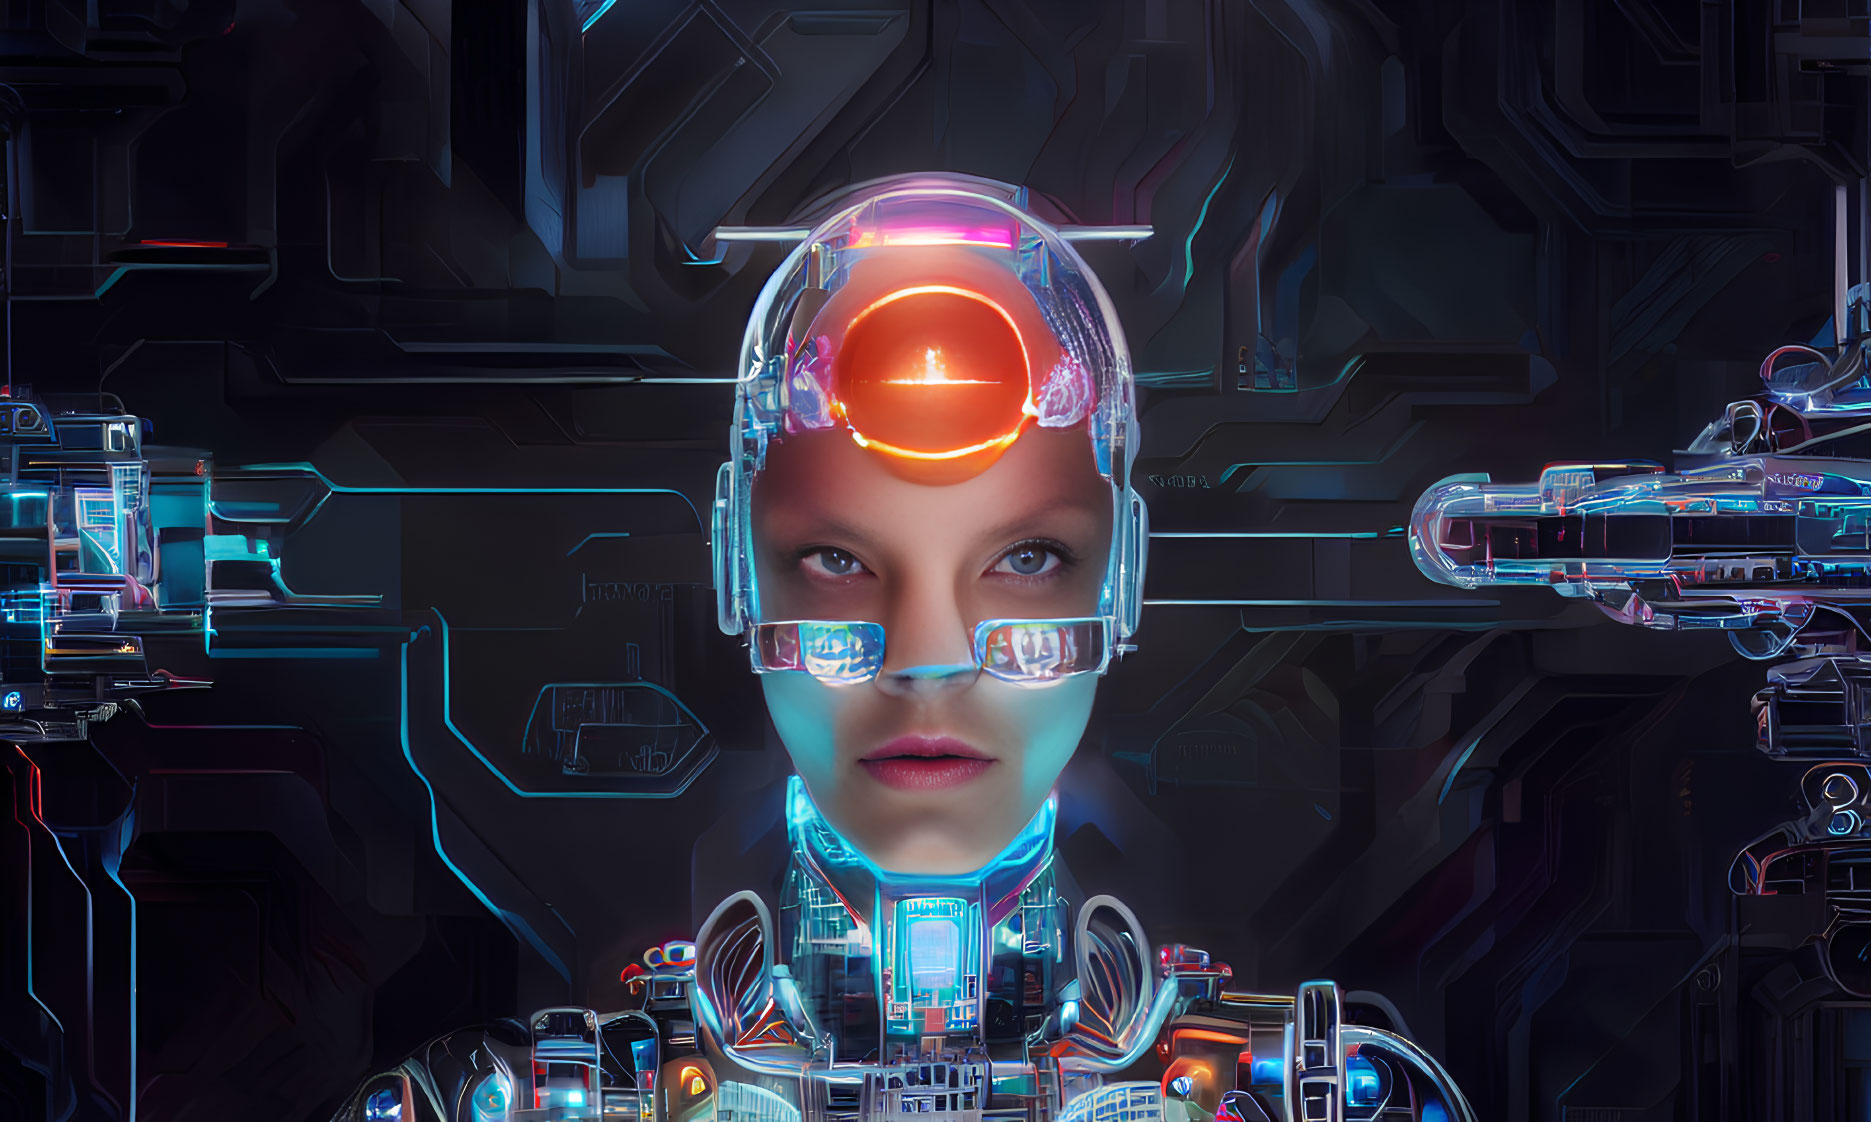 Futuristic cybernetic being with illuminated headgear and glasses in technological setting